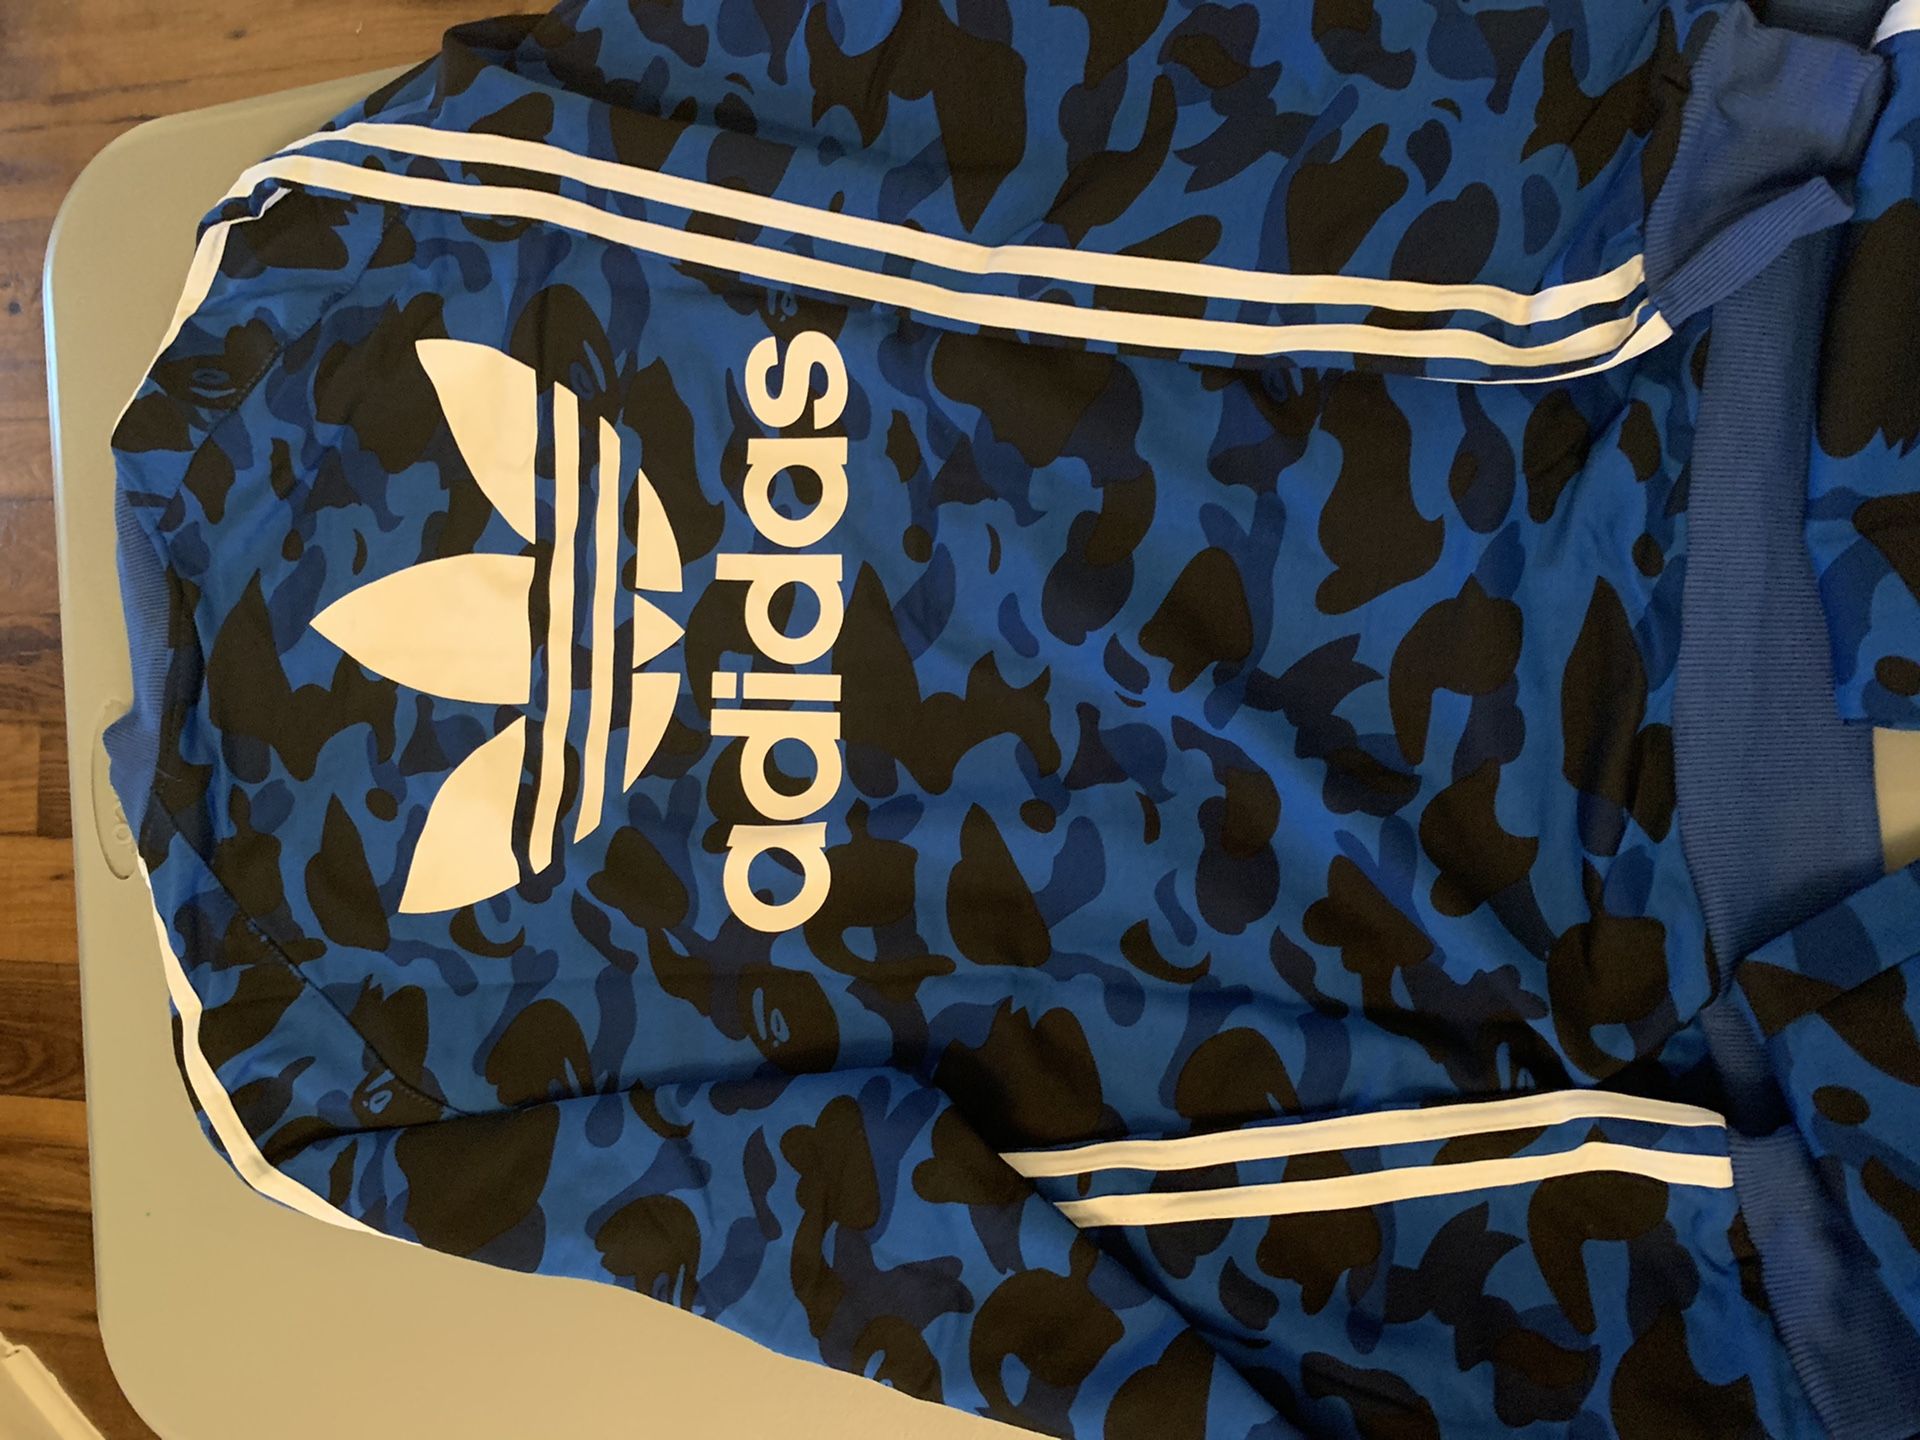 Adidas bape track suit first come first serve